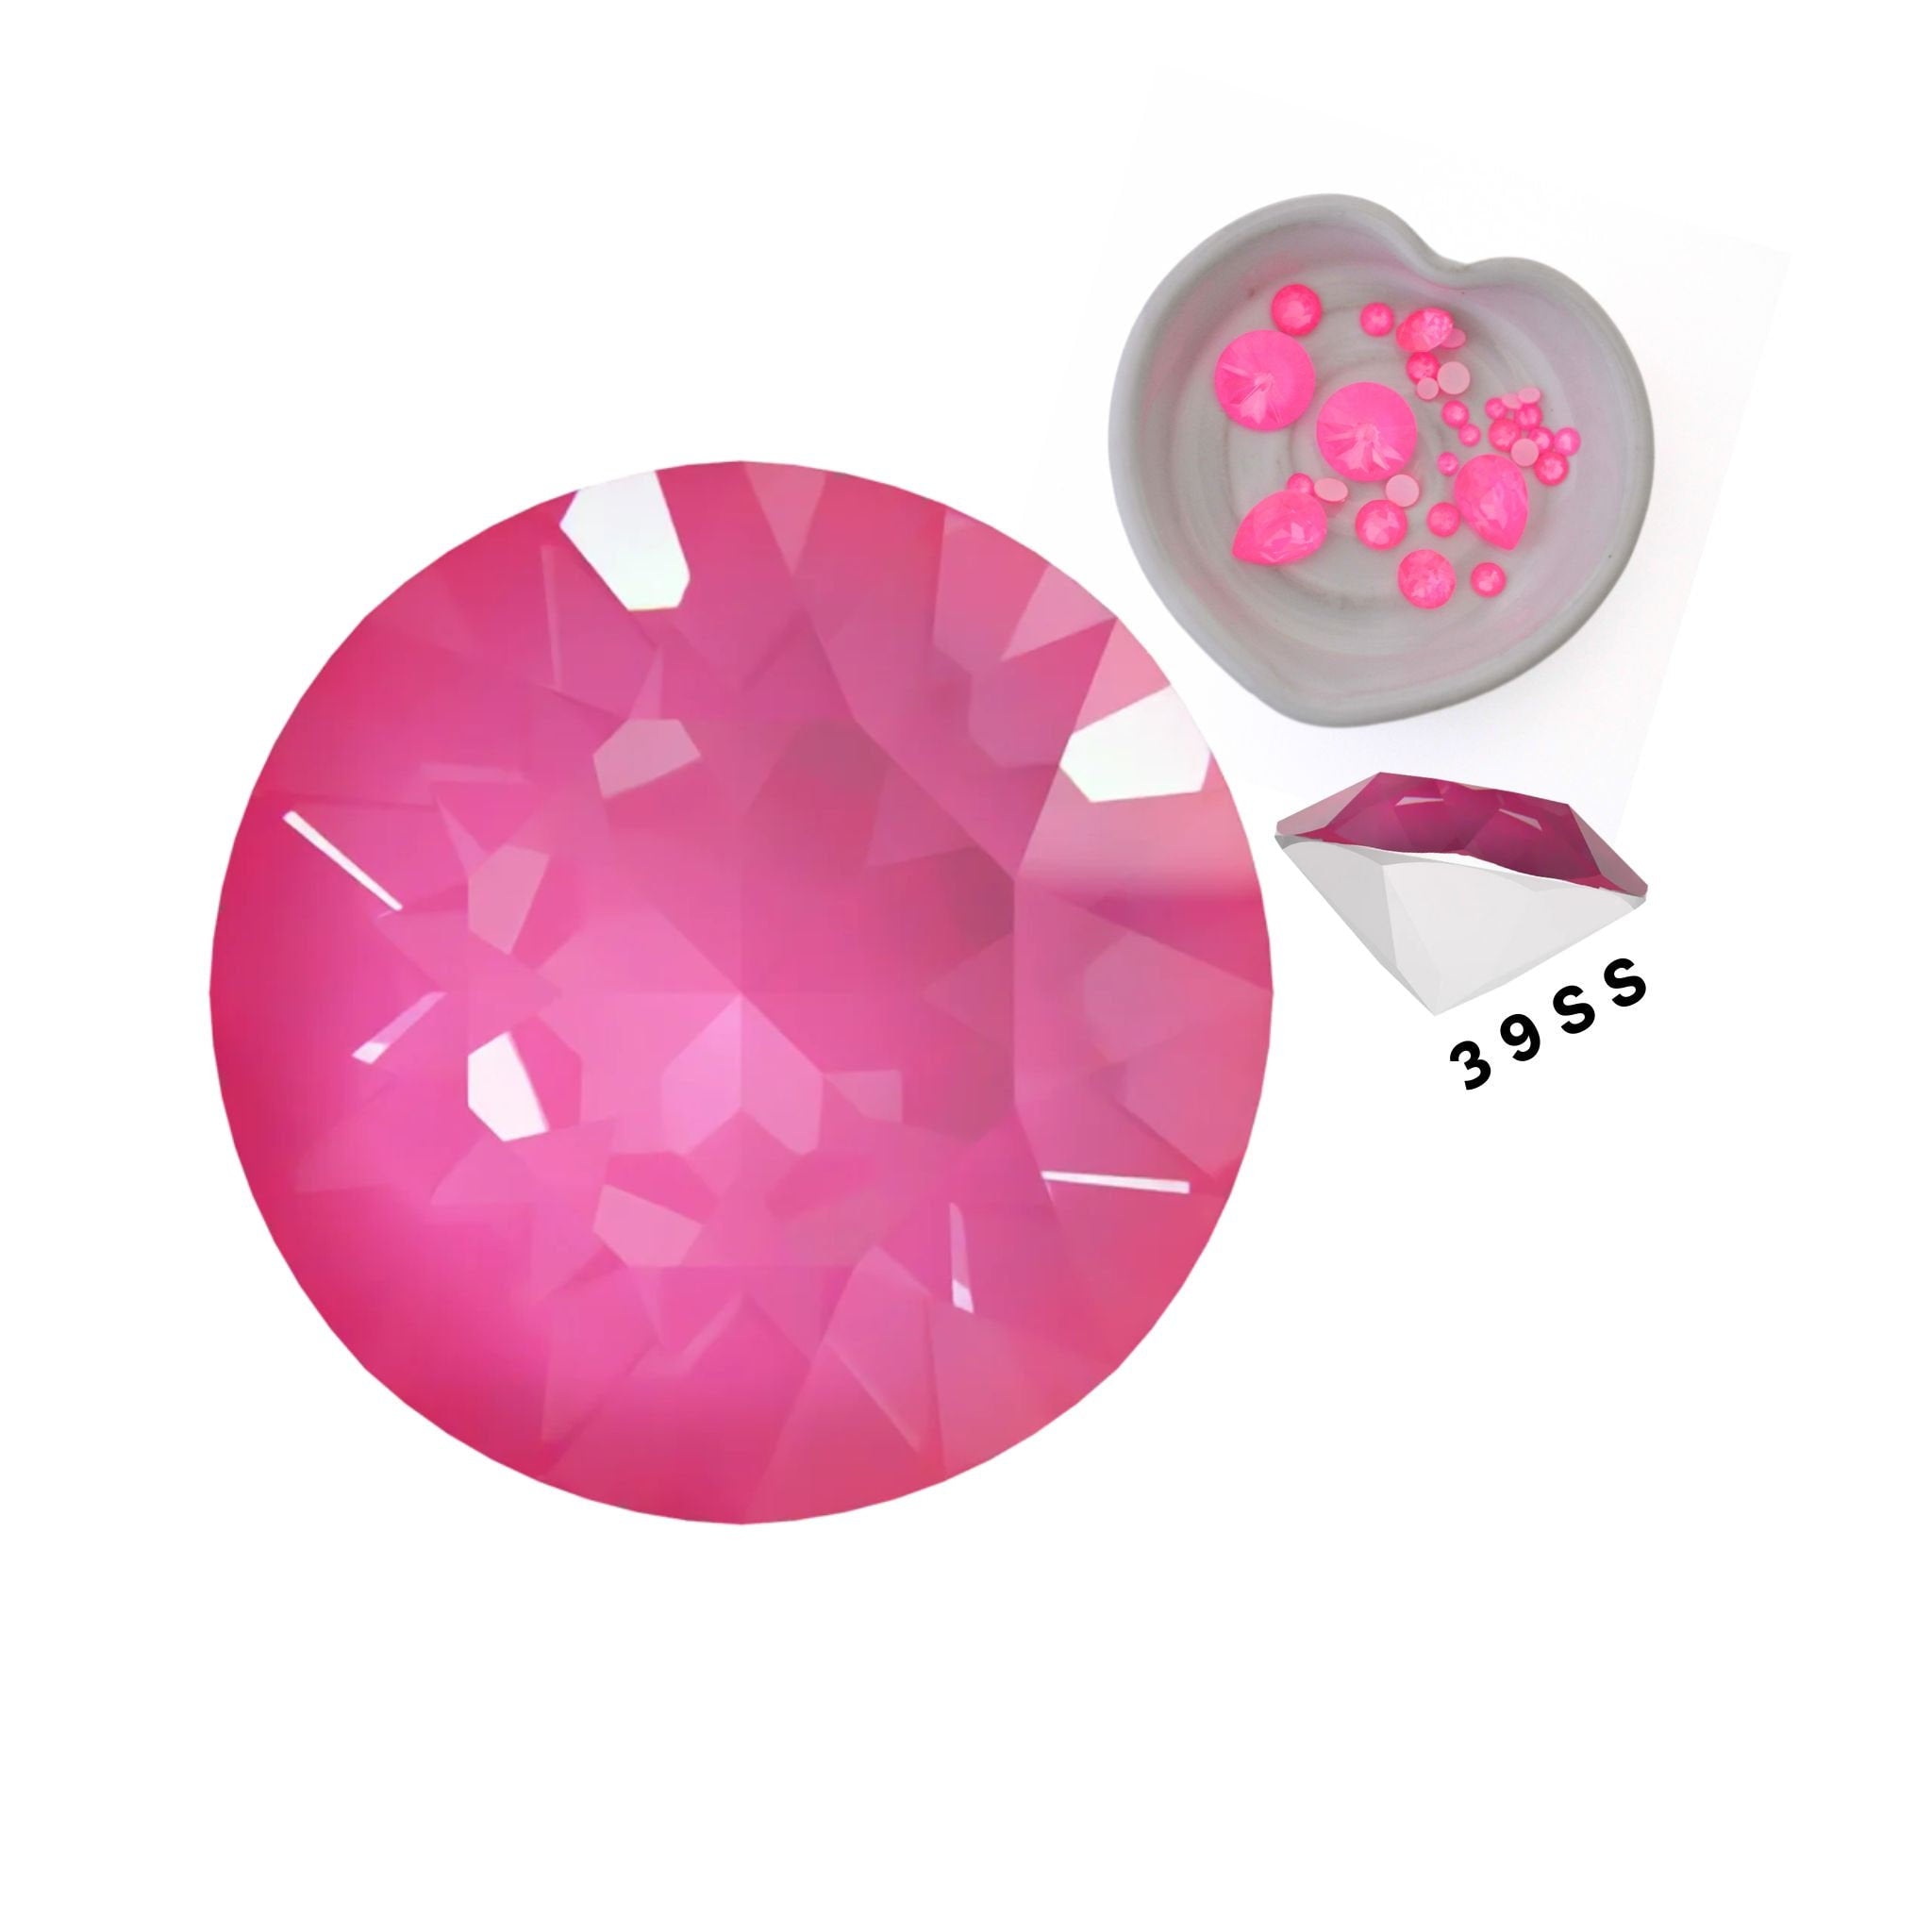 Electric Pink Ignite 1088 Pointed Back Chaton Barton Crystal 39ss, 8mm